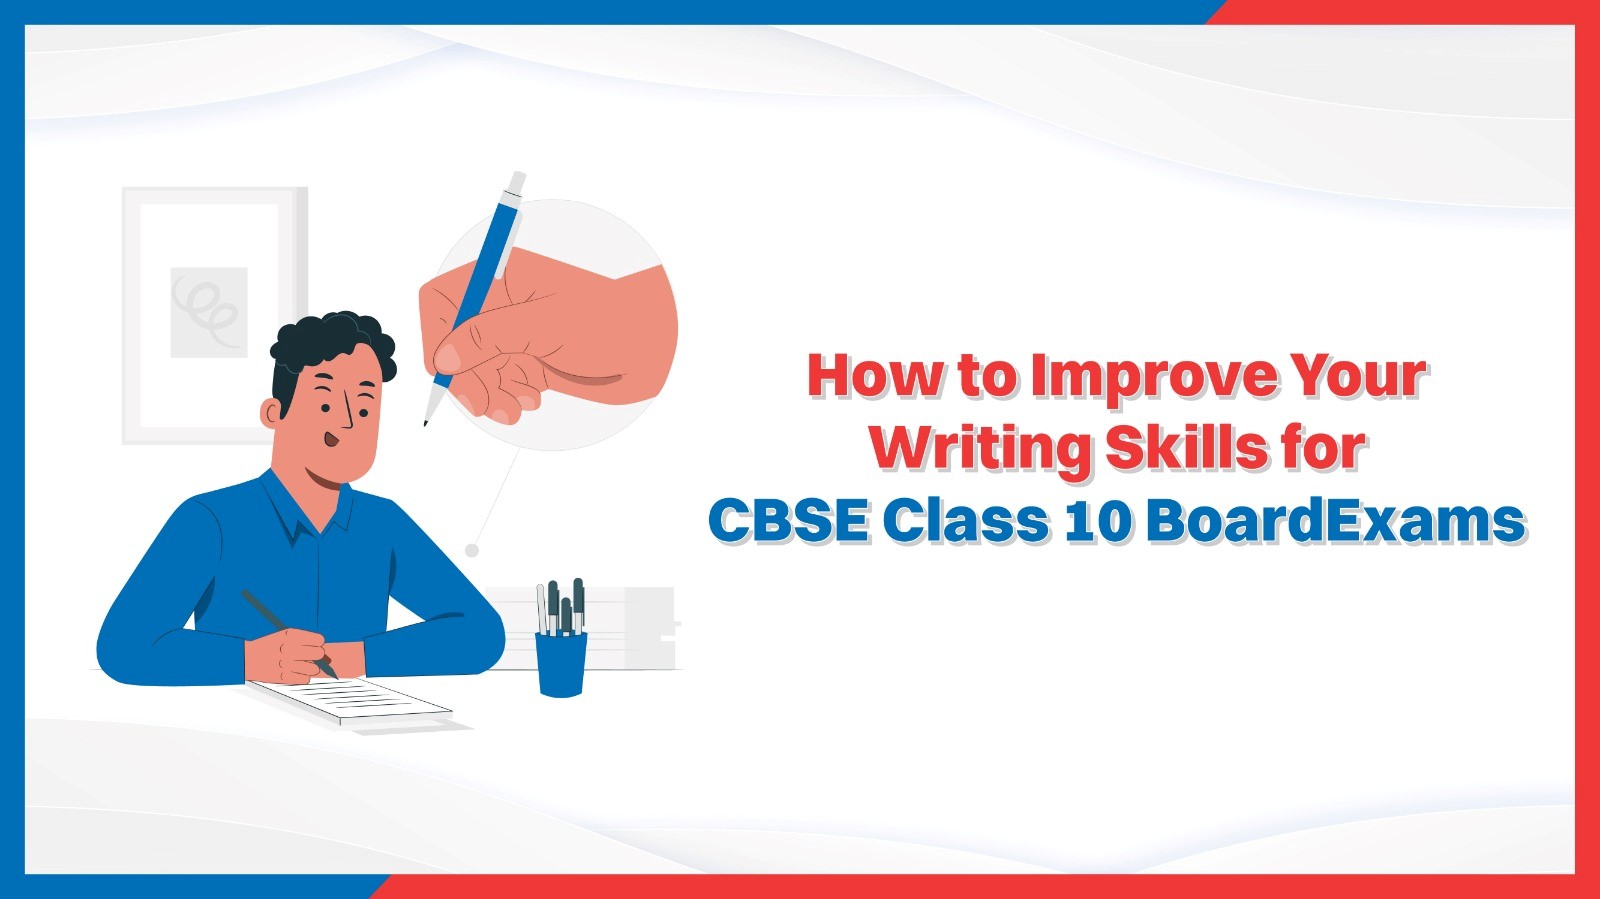 How to Improve Your Writing Skills for CBSE Class 10 Board Exams.jpg